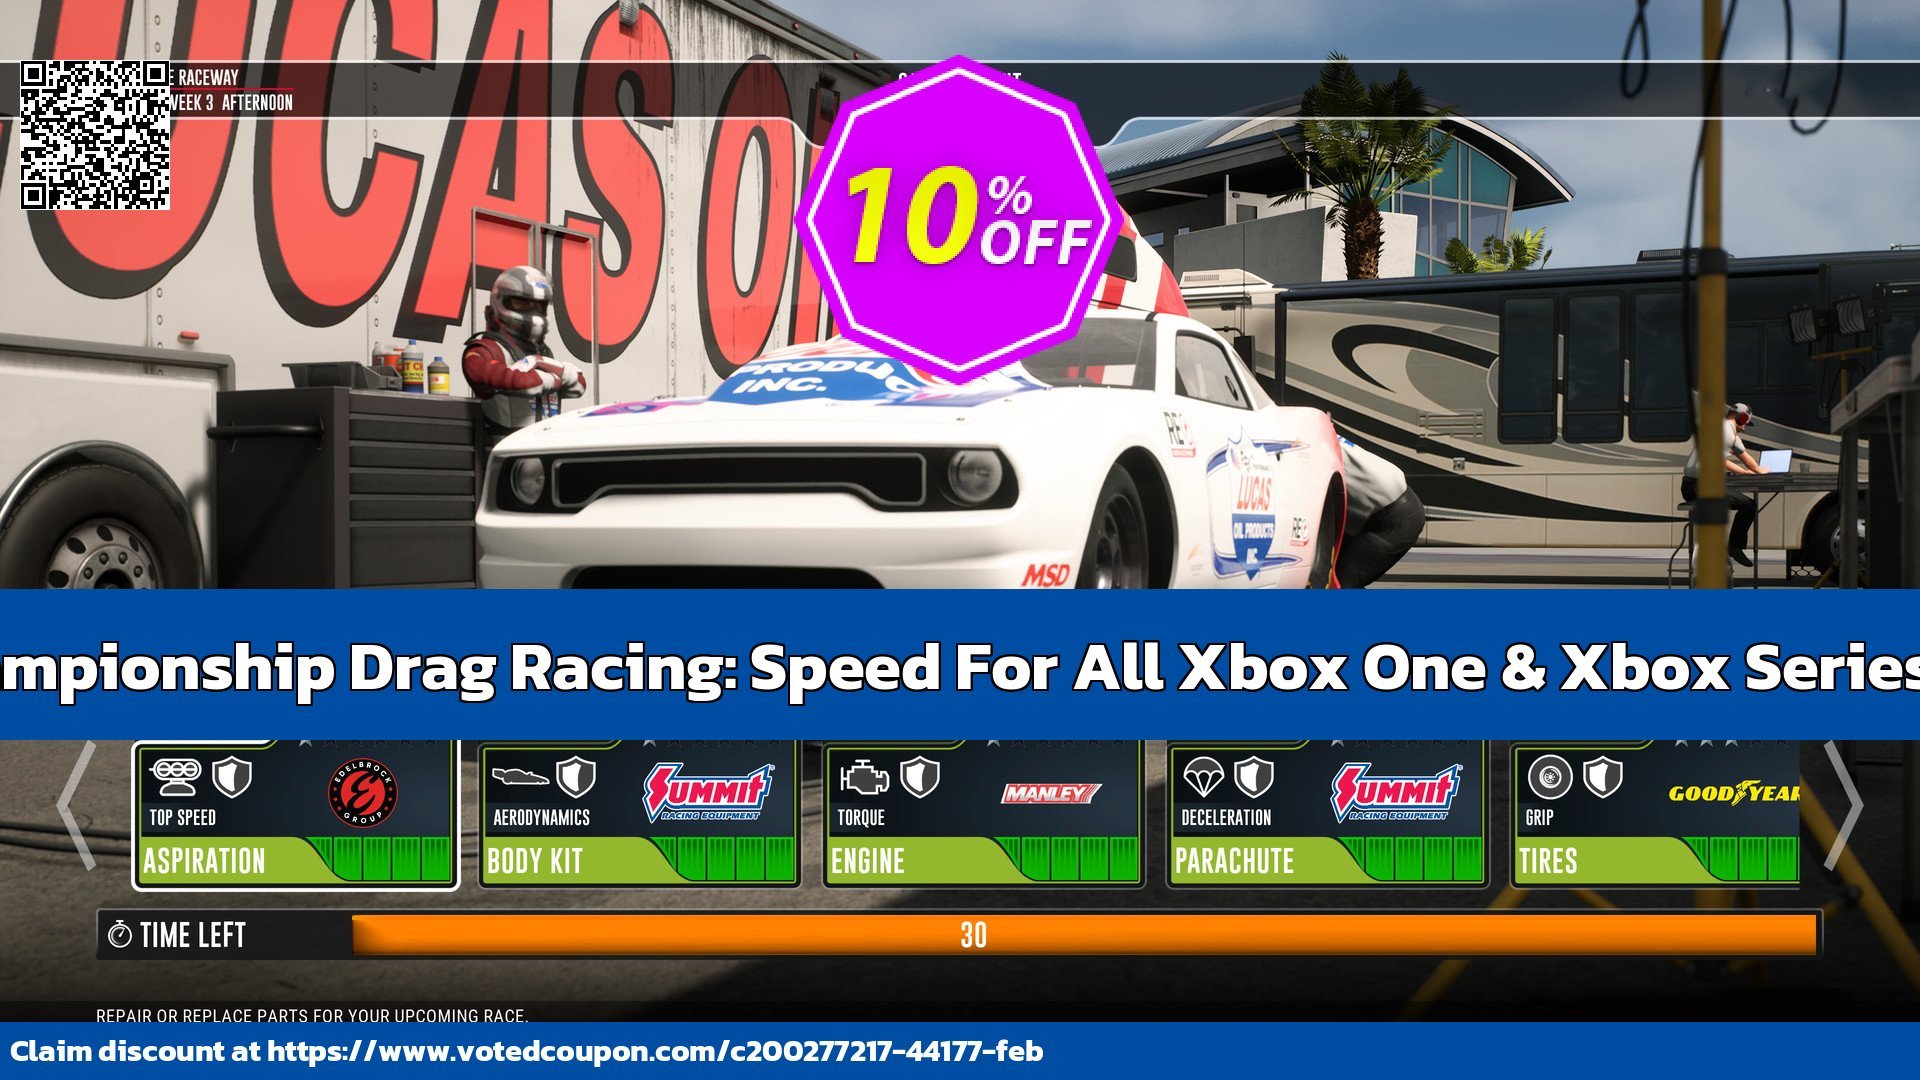 NHRA Championship Drag Racing: Speed For All Xbox One & Xbox Series X|S, WW  voted-on promotion codes